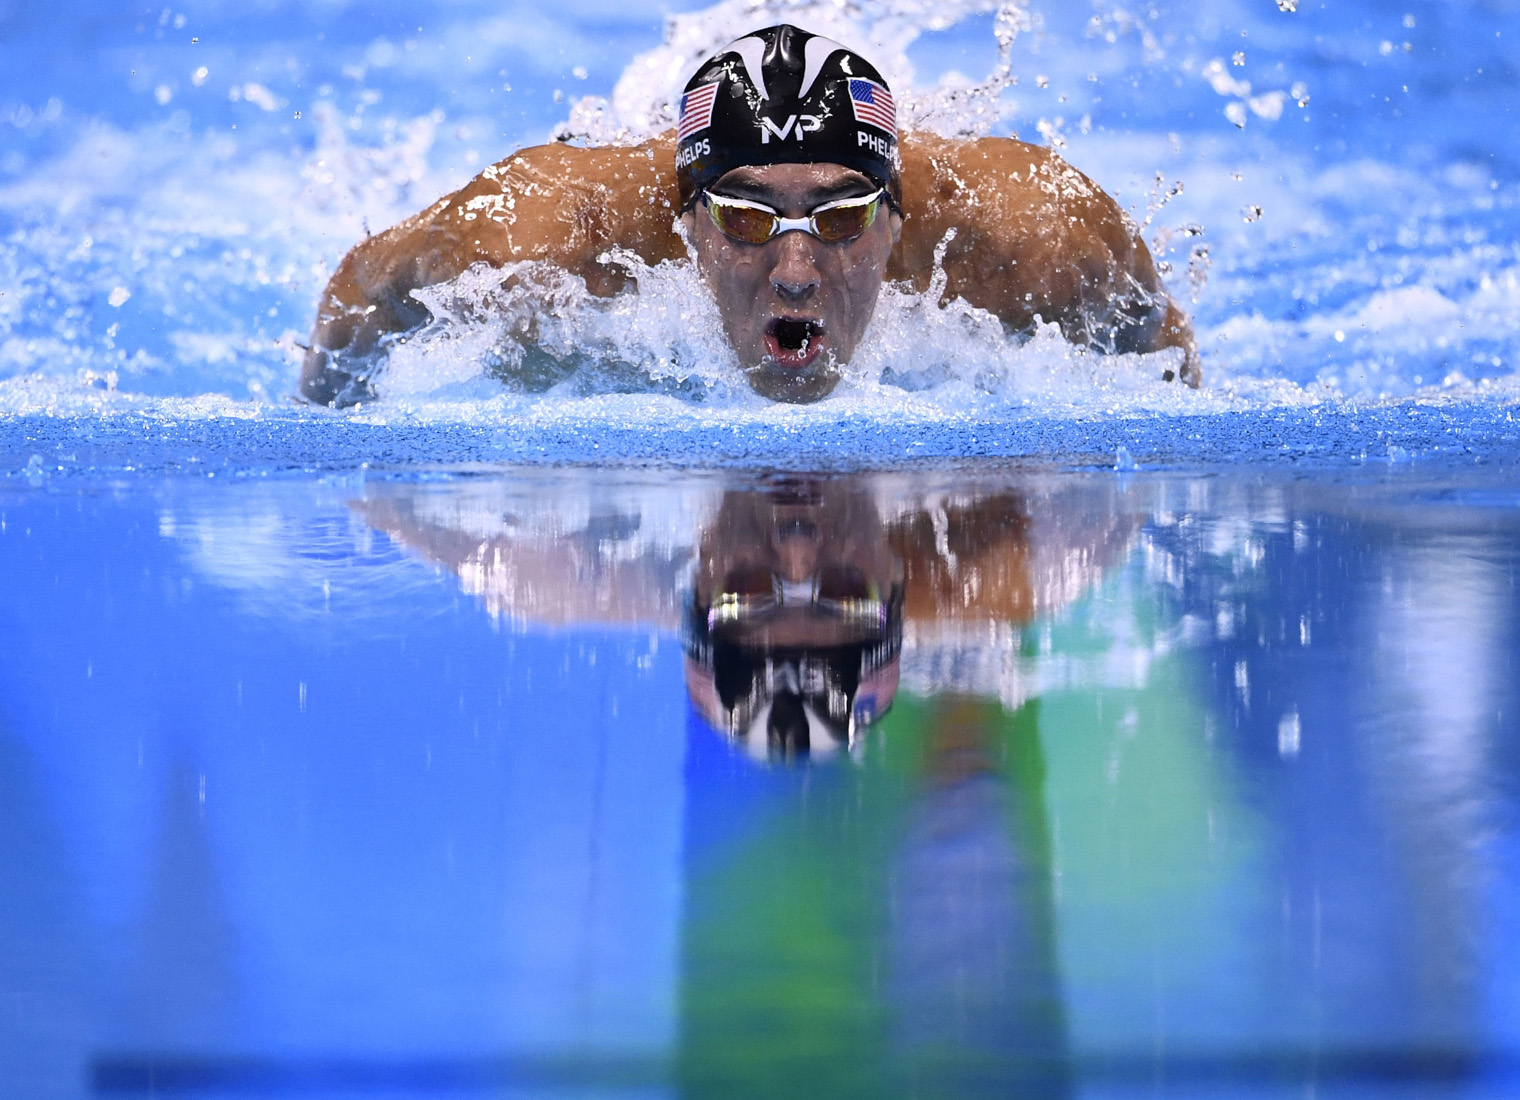 TOPSHOT - USA's Michael Phelps competes to win the Men's 200m Individual Medley Final during the swimming event at the Rio 2016 Olympic Games at the Olympic Aquatics Stadium in Rio de Janeiro on August 11, 2016. / AFP / CHRISTOPHE SIMON (Photo credit should read CHRISTOPHE SIMON/AFP/Getty Images)